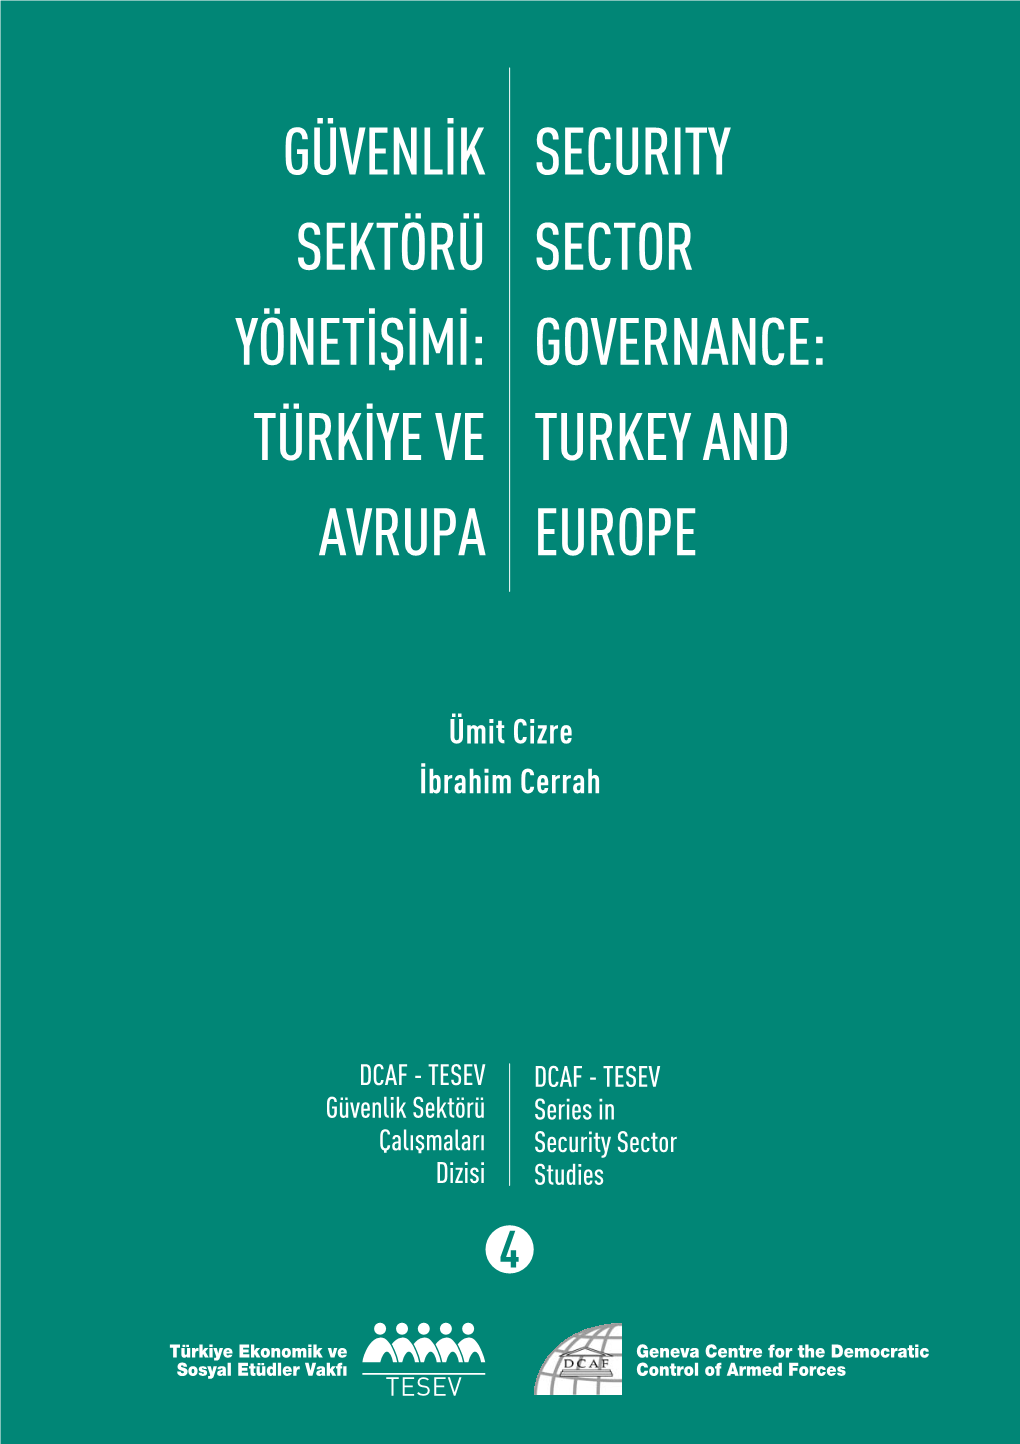 Security Sector Governance: Turkey and Europe